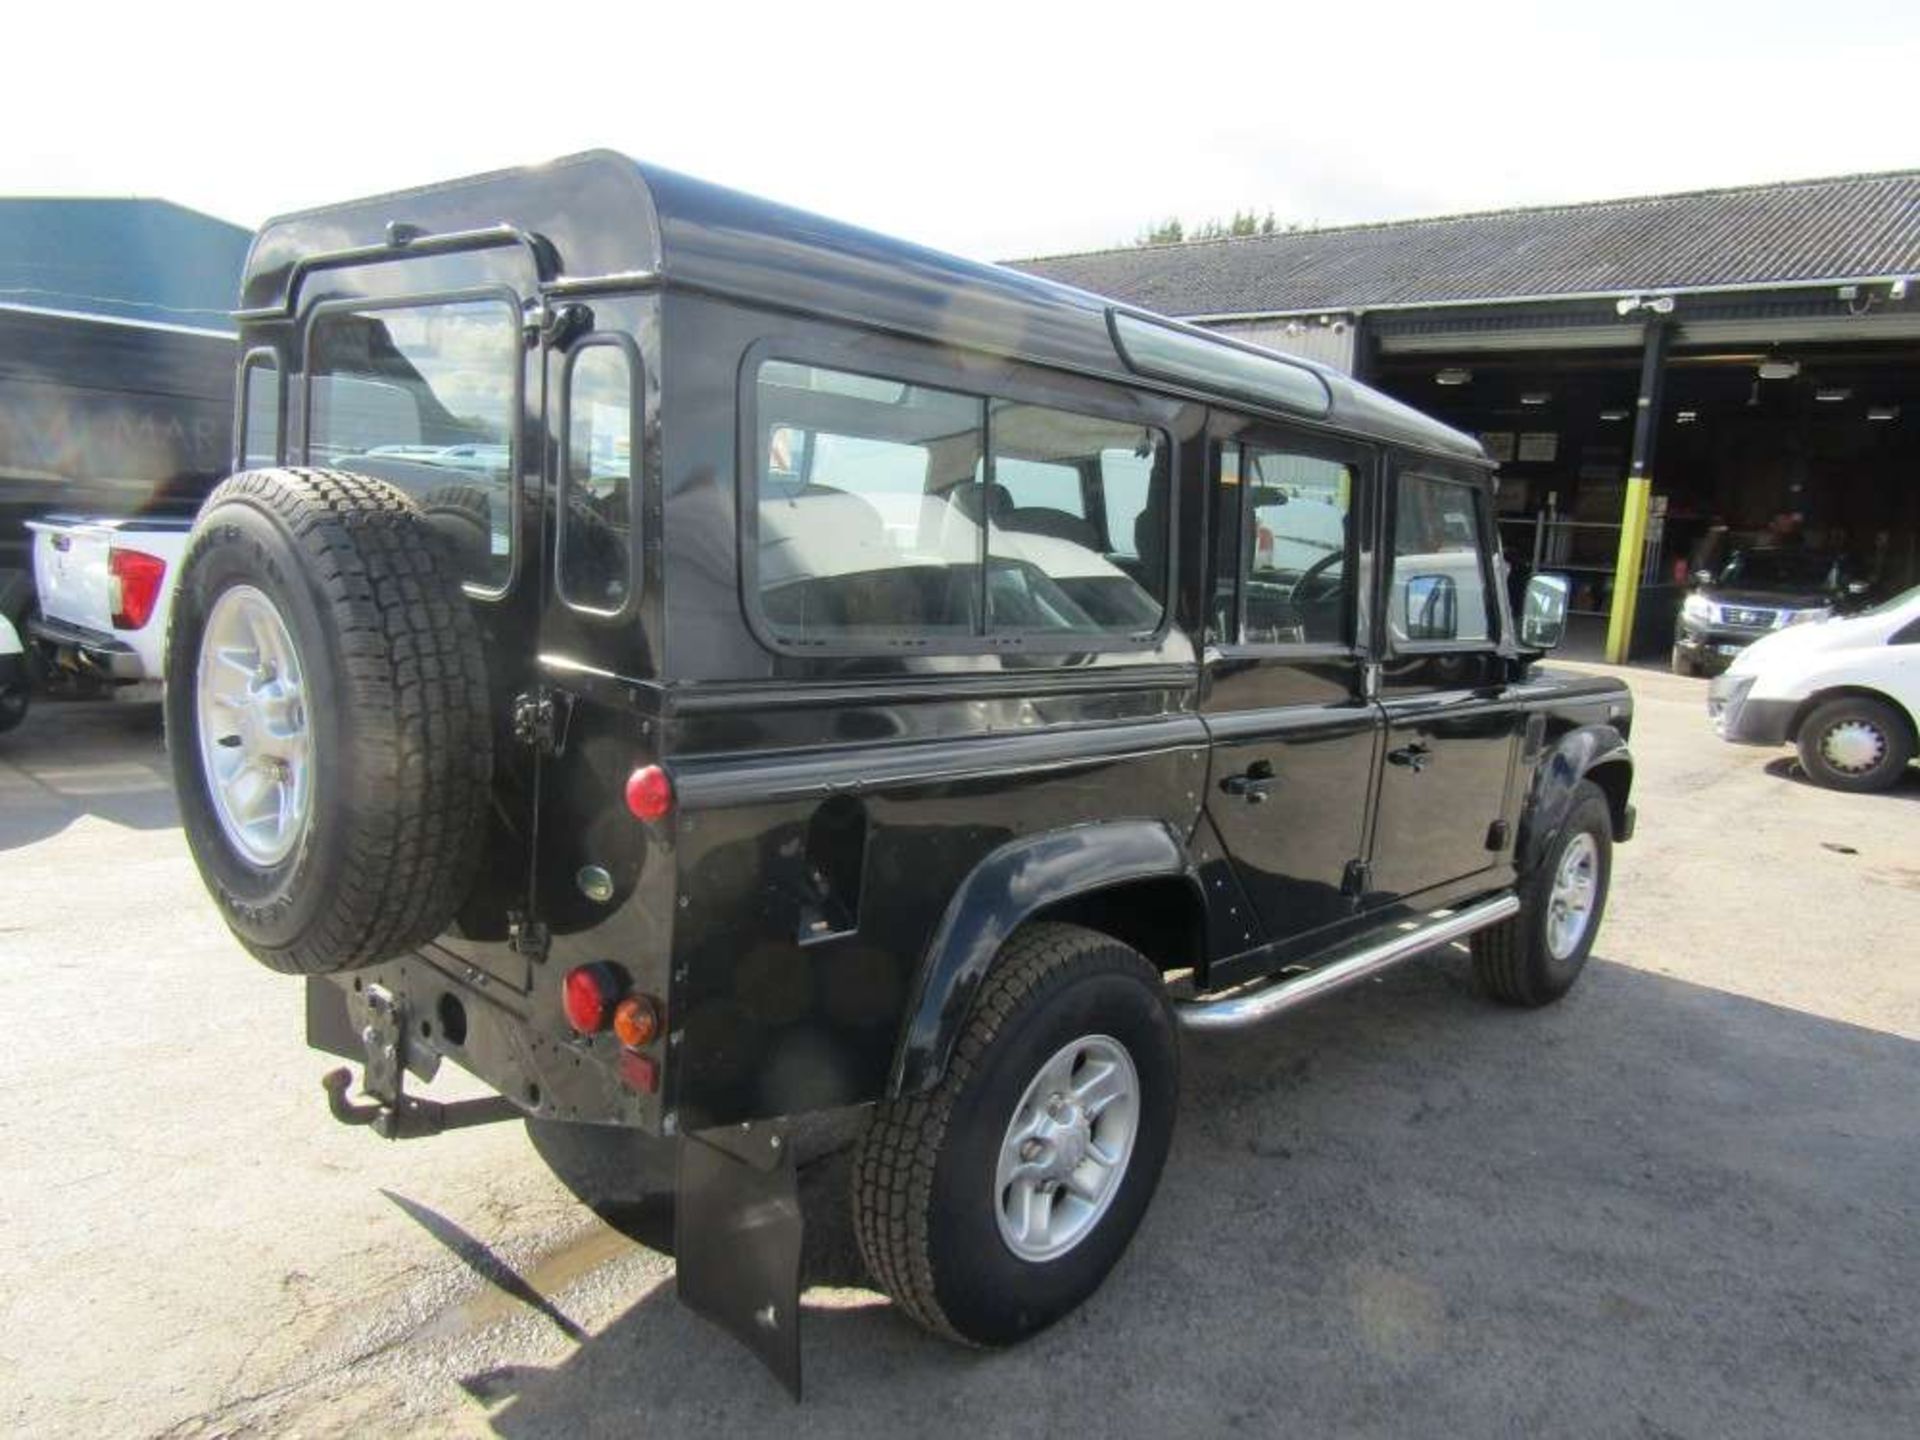 2006 06 reg Land Rover Defender 110 TD5 XS County - Image 4 of 8